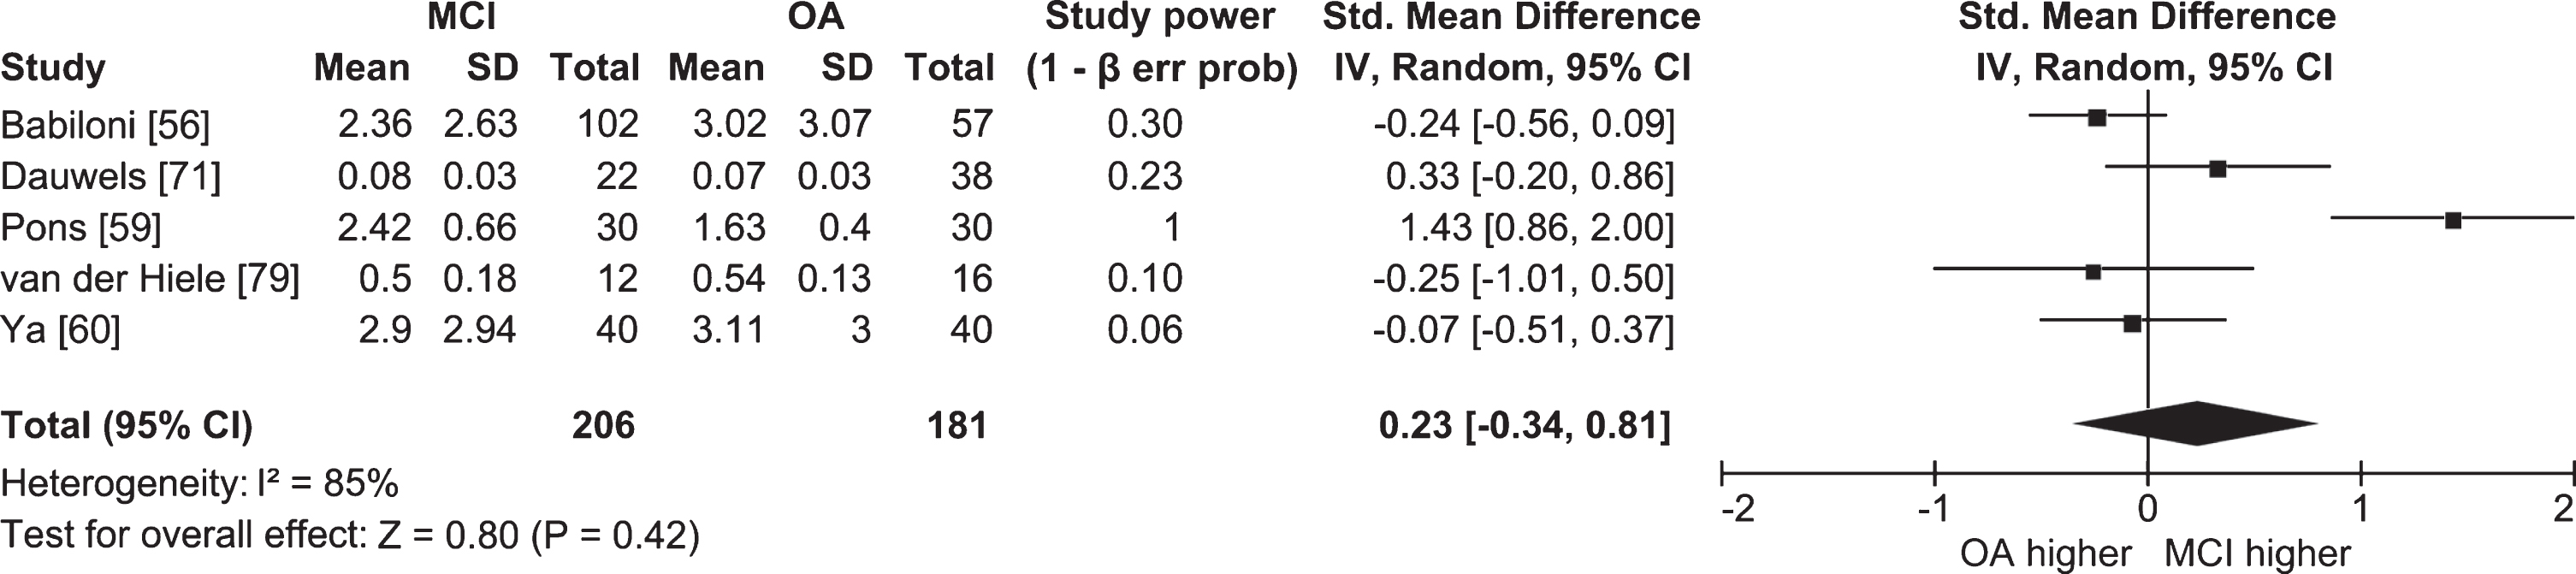 Table and forest plot of effect sizes for power in awake resting state in the lower alpha band in people with MCI versus cognitively healthy older adults (OA). For the explanation of the table and the plot, see Fig. 2.